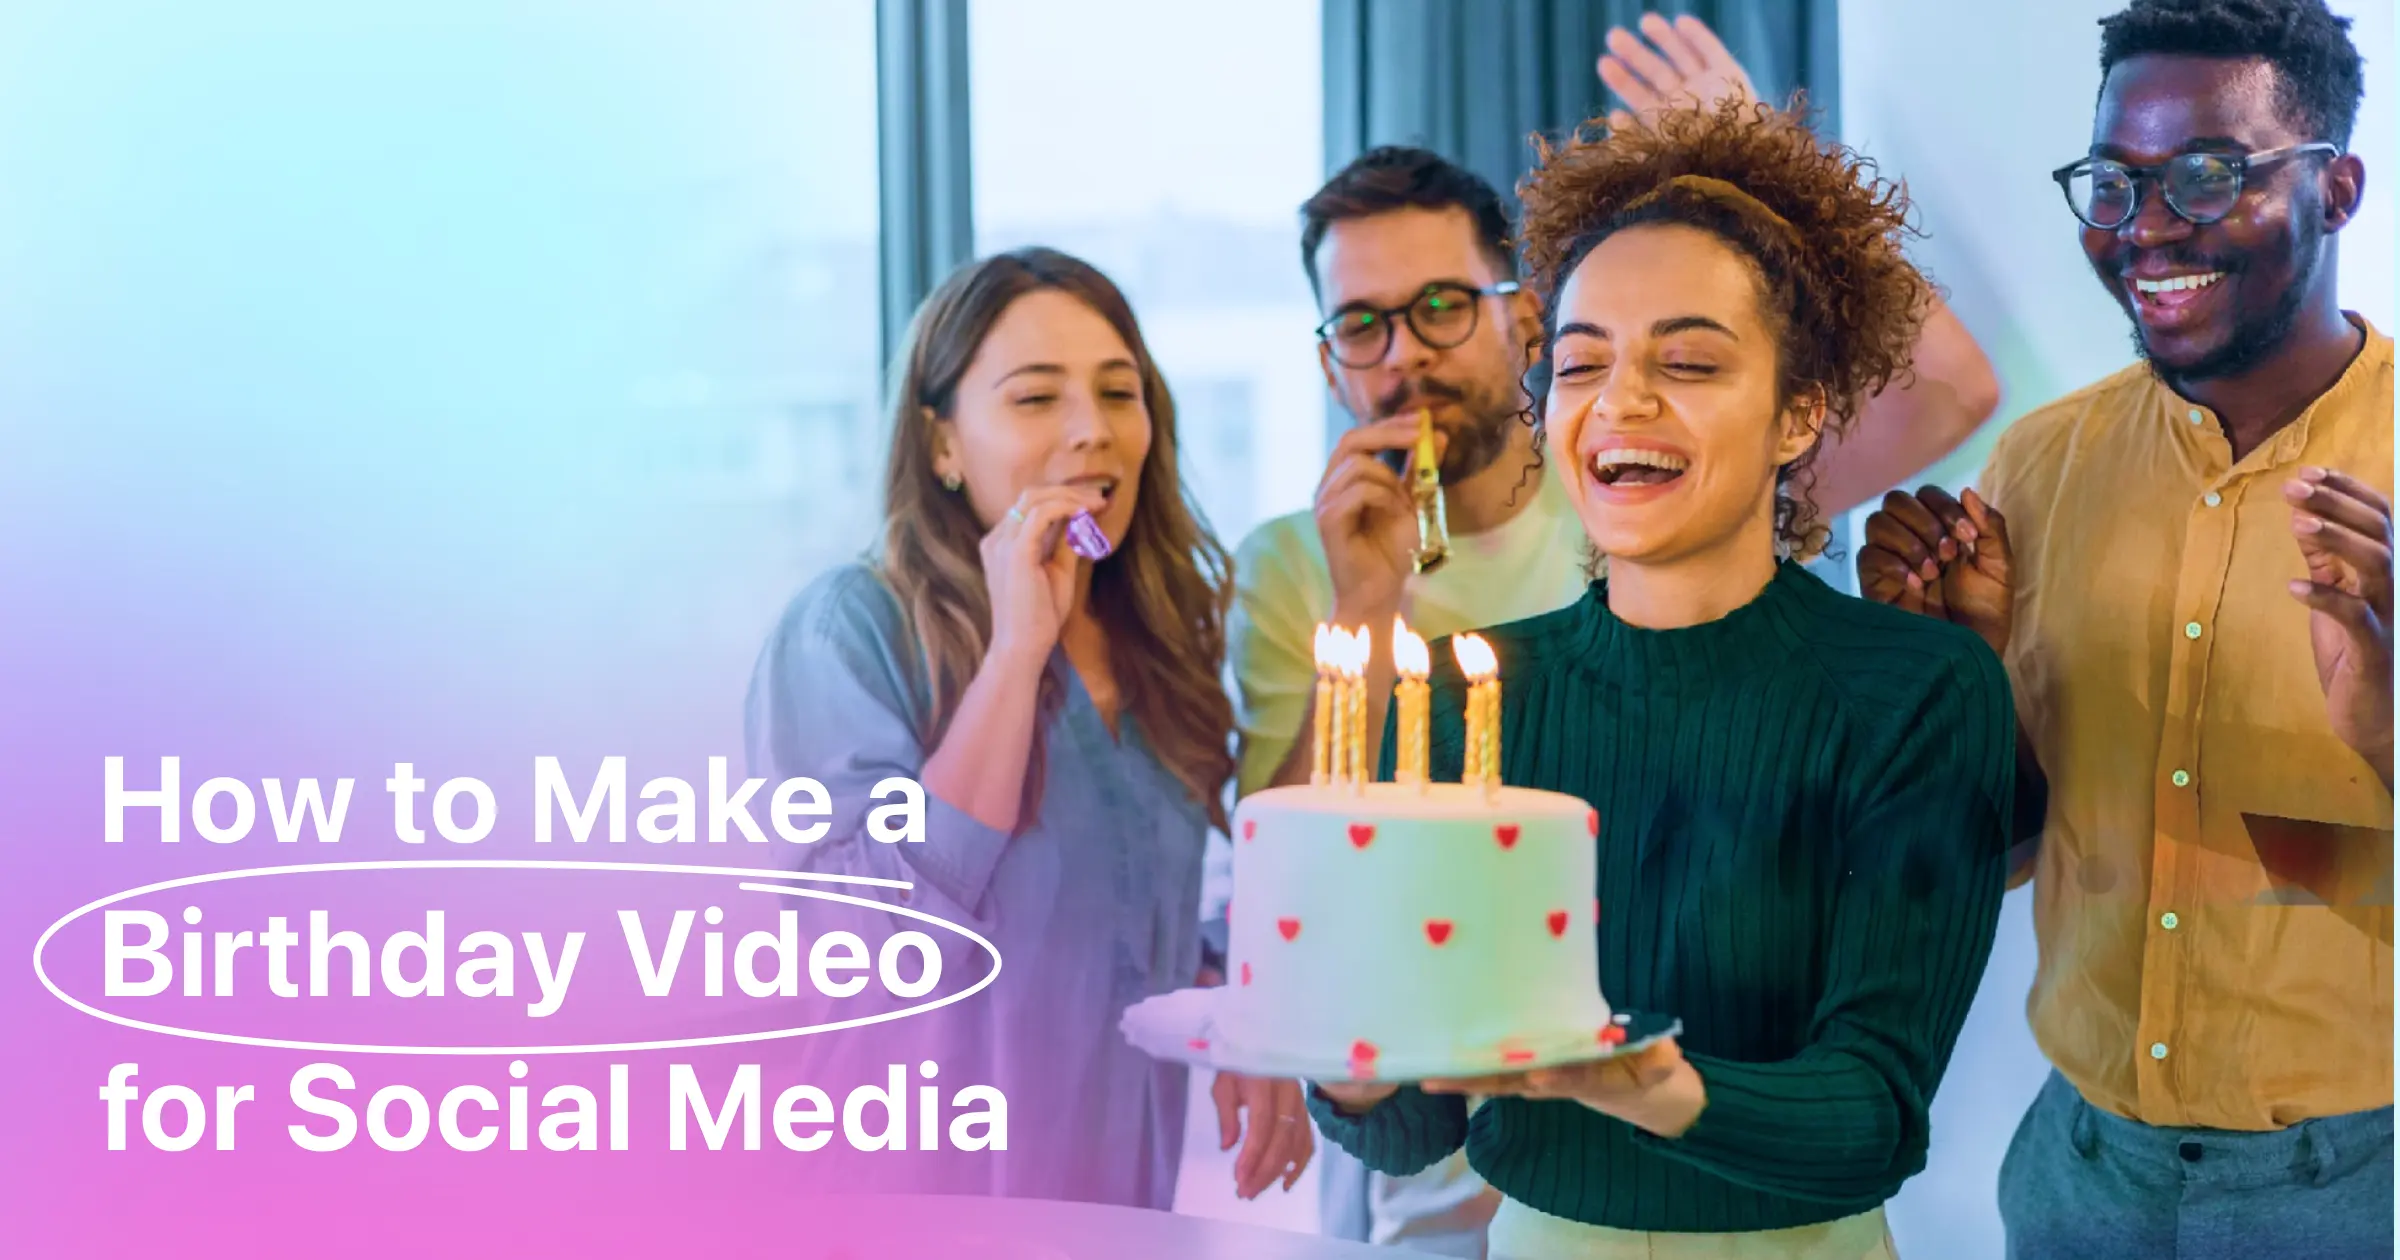 How to Make a Birthday Video